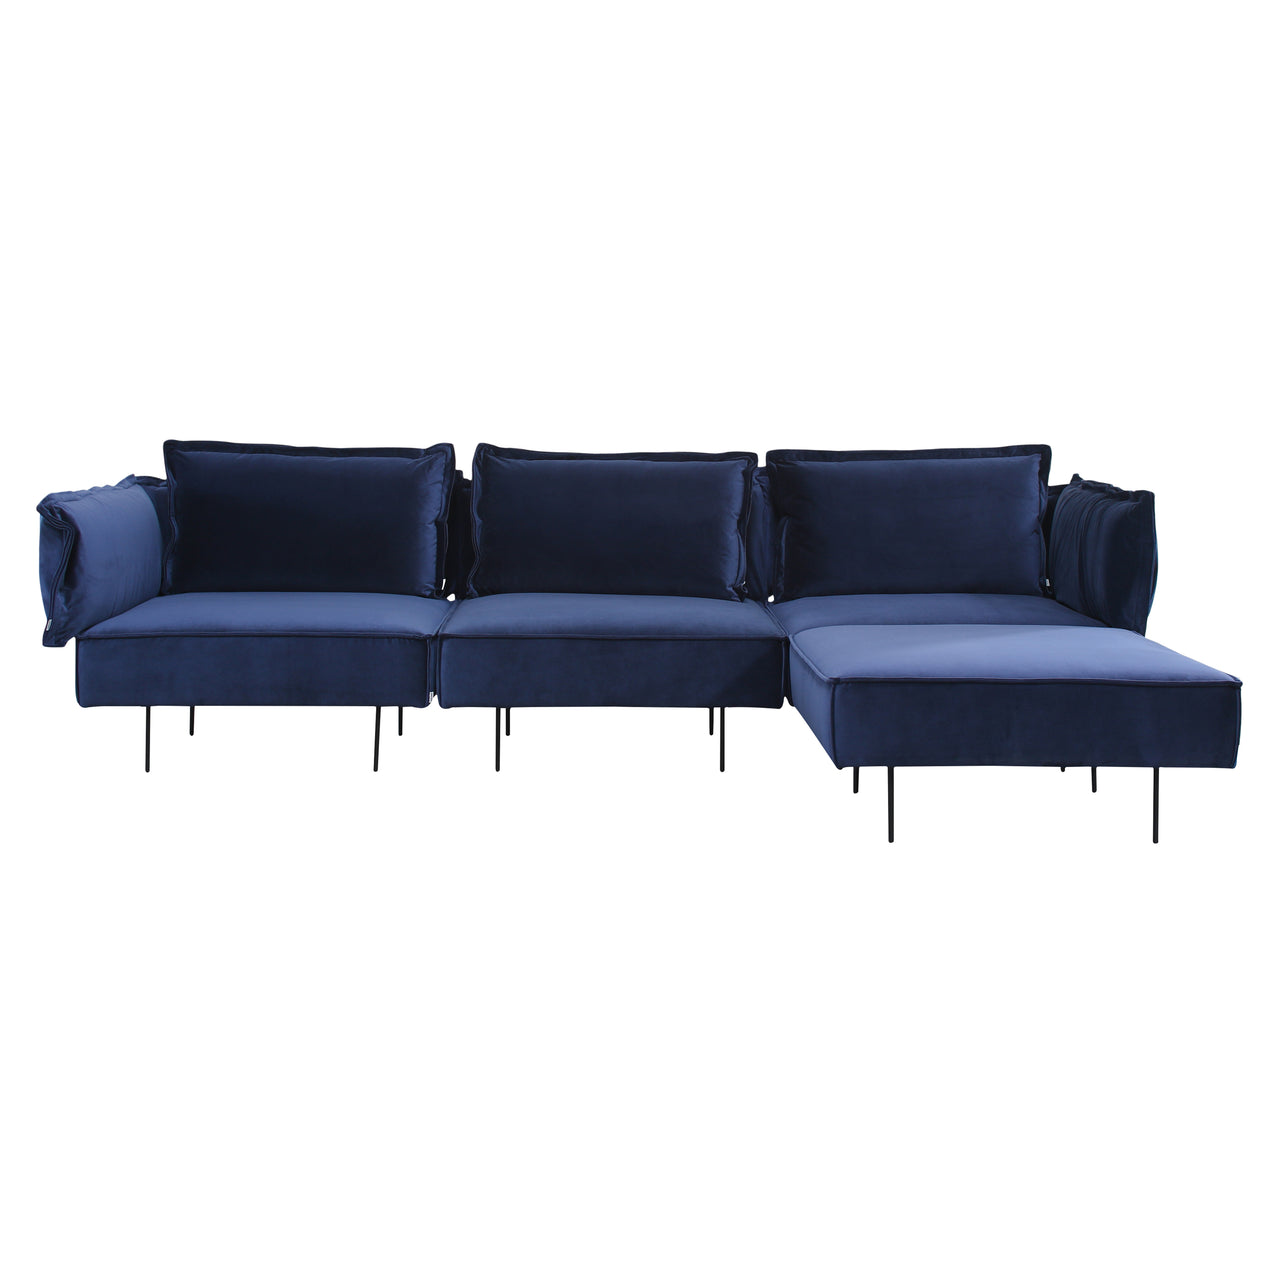 3-Seat Modular Sofa with Chaise: Sapphire 606